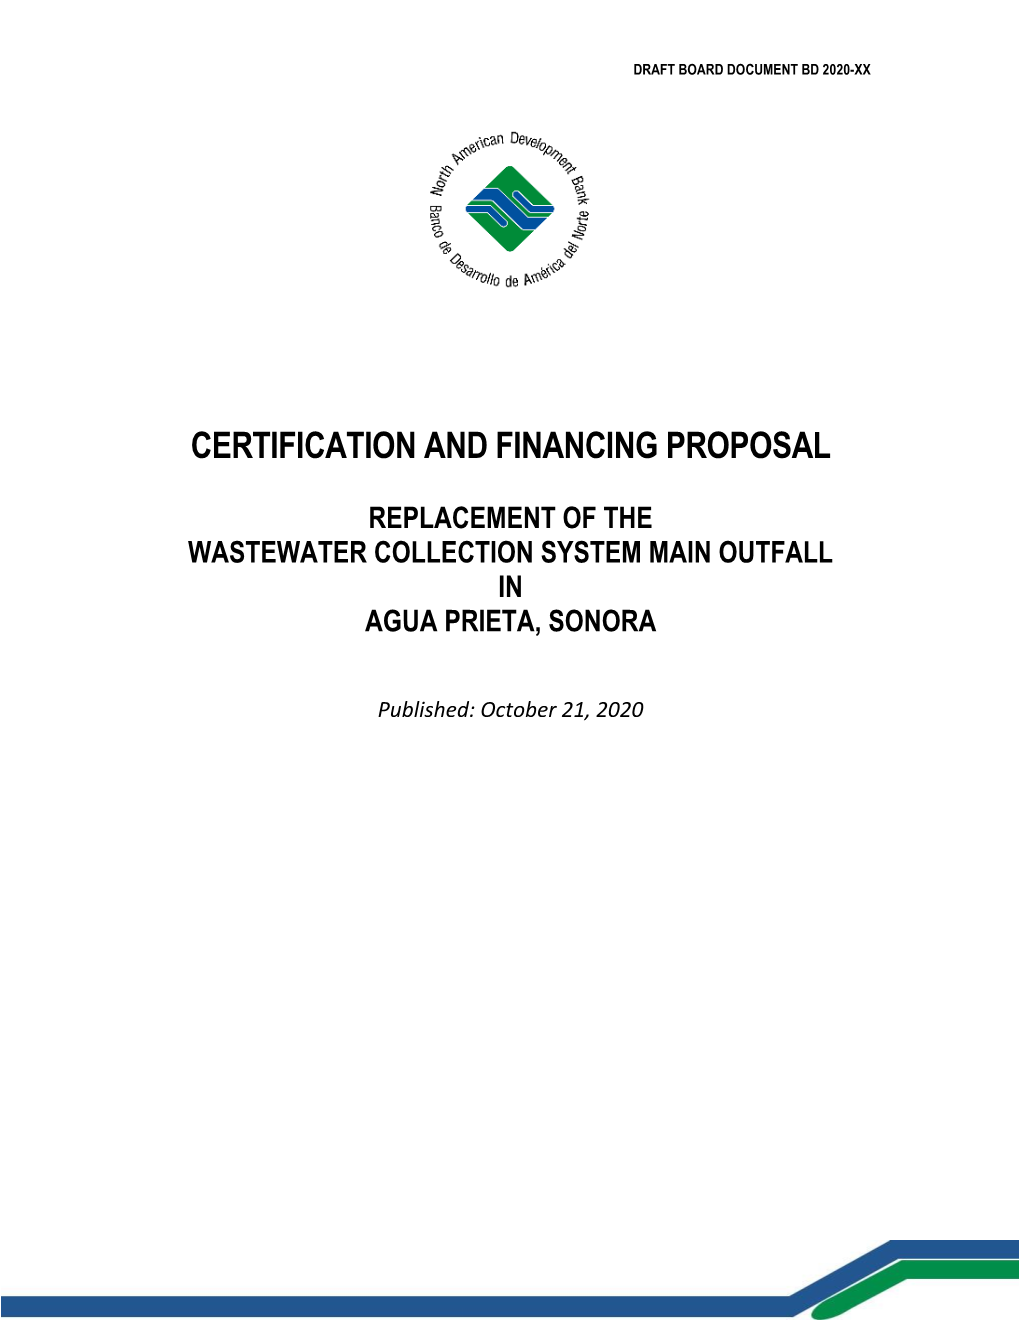 Certification and Financing Proposal